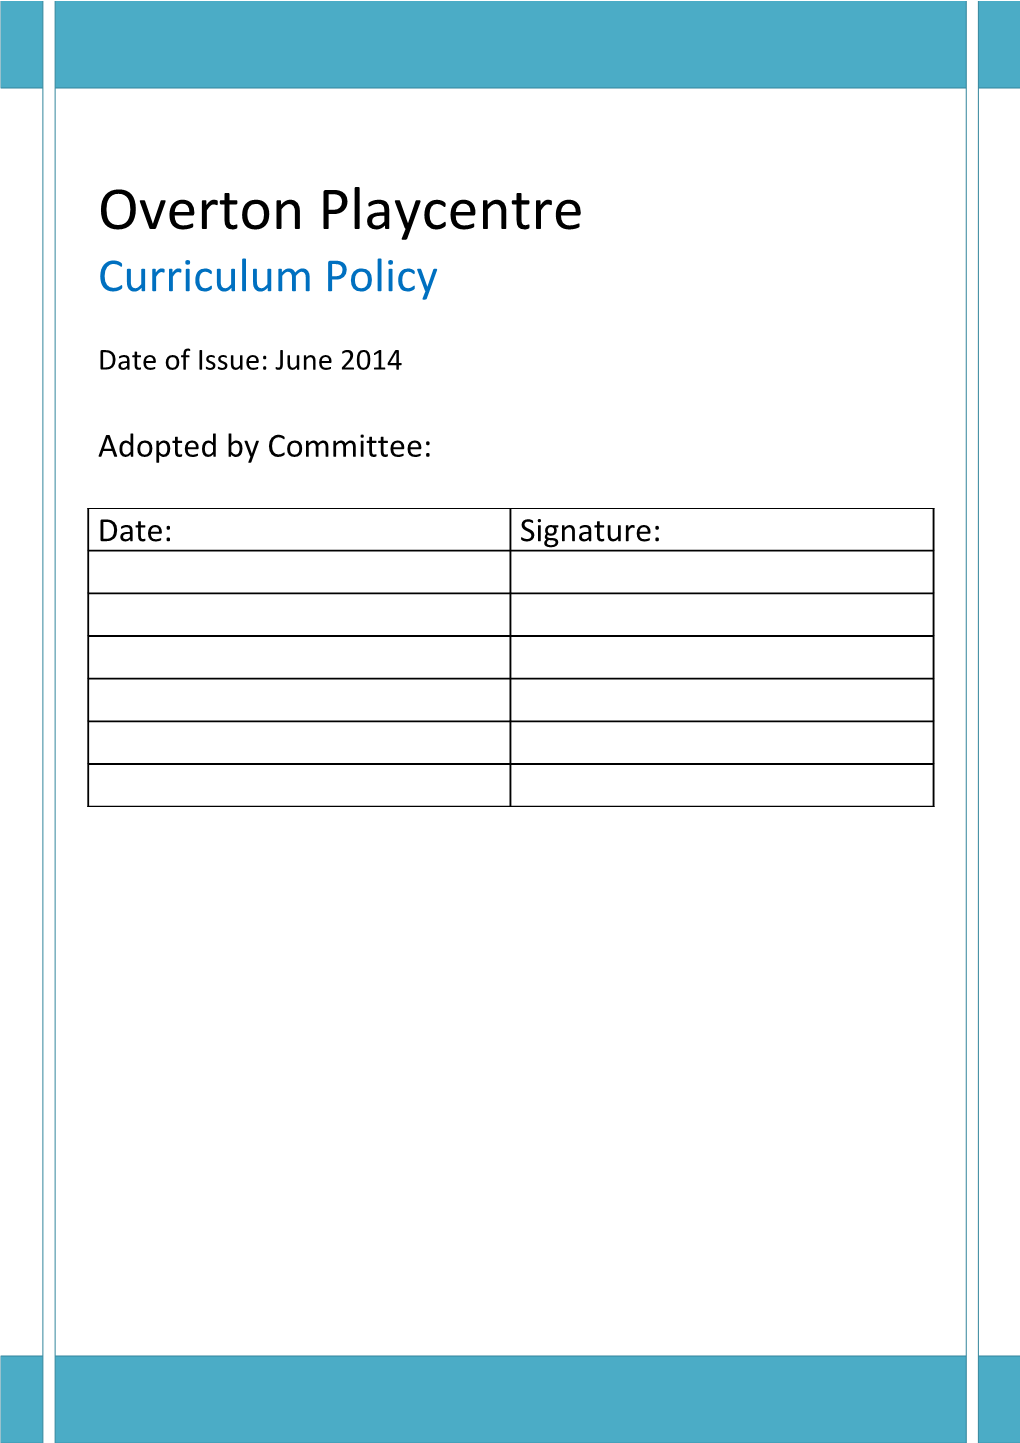 This Document Is Approved and Authorised for the Application with Overton Playcentre